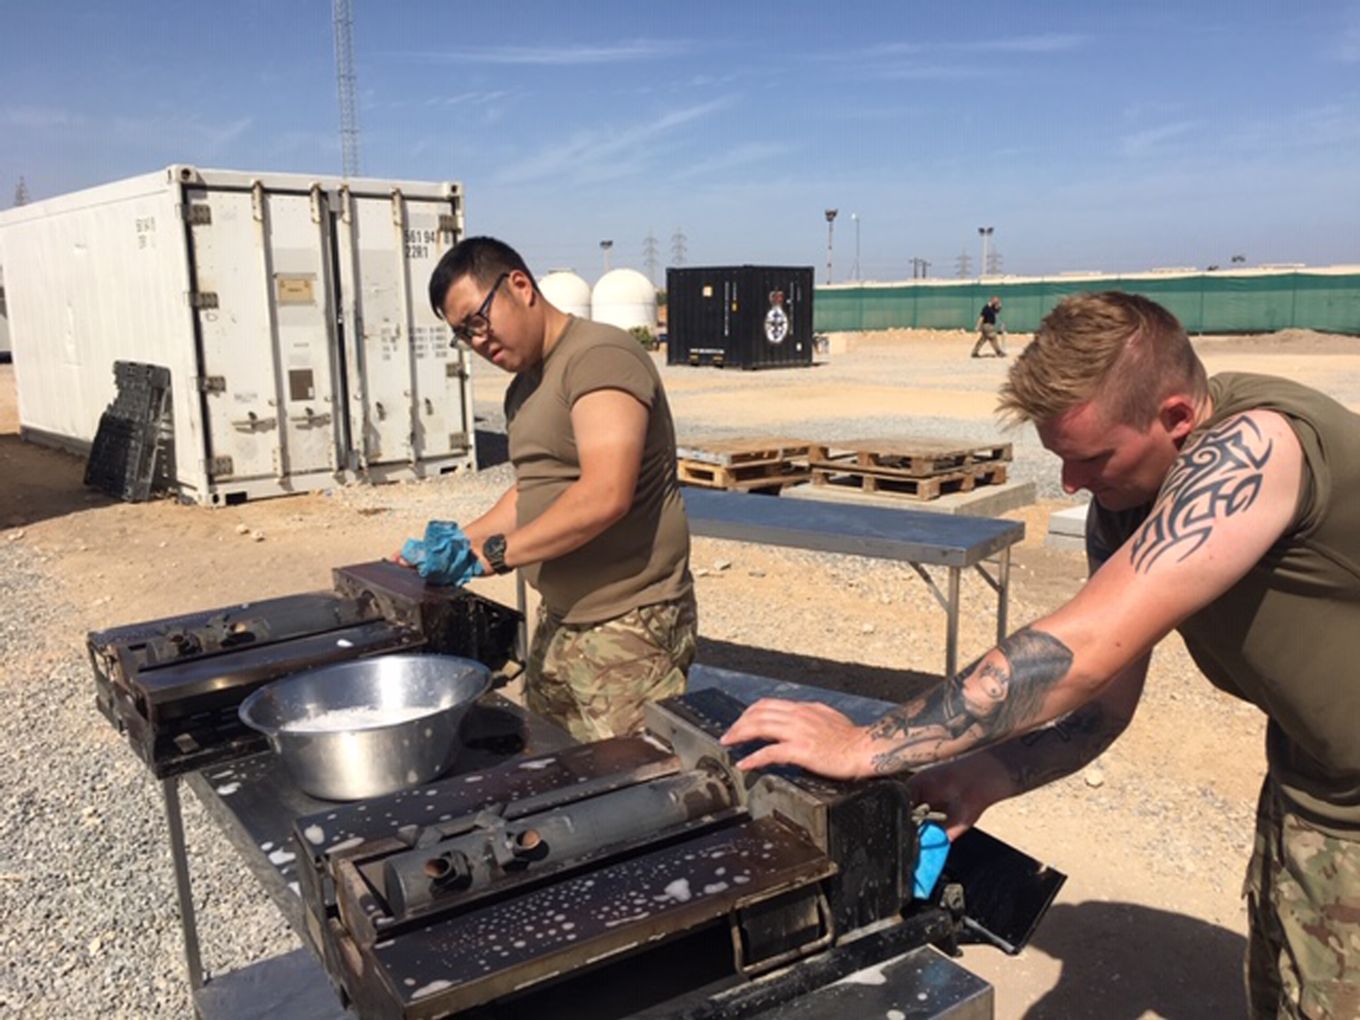 3 Mobile Catering Squadron at work during Exercise Saif Sareea.